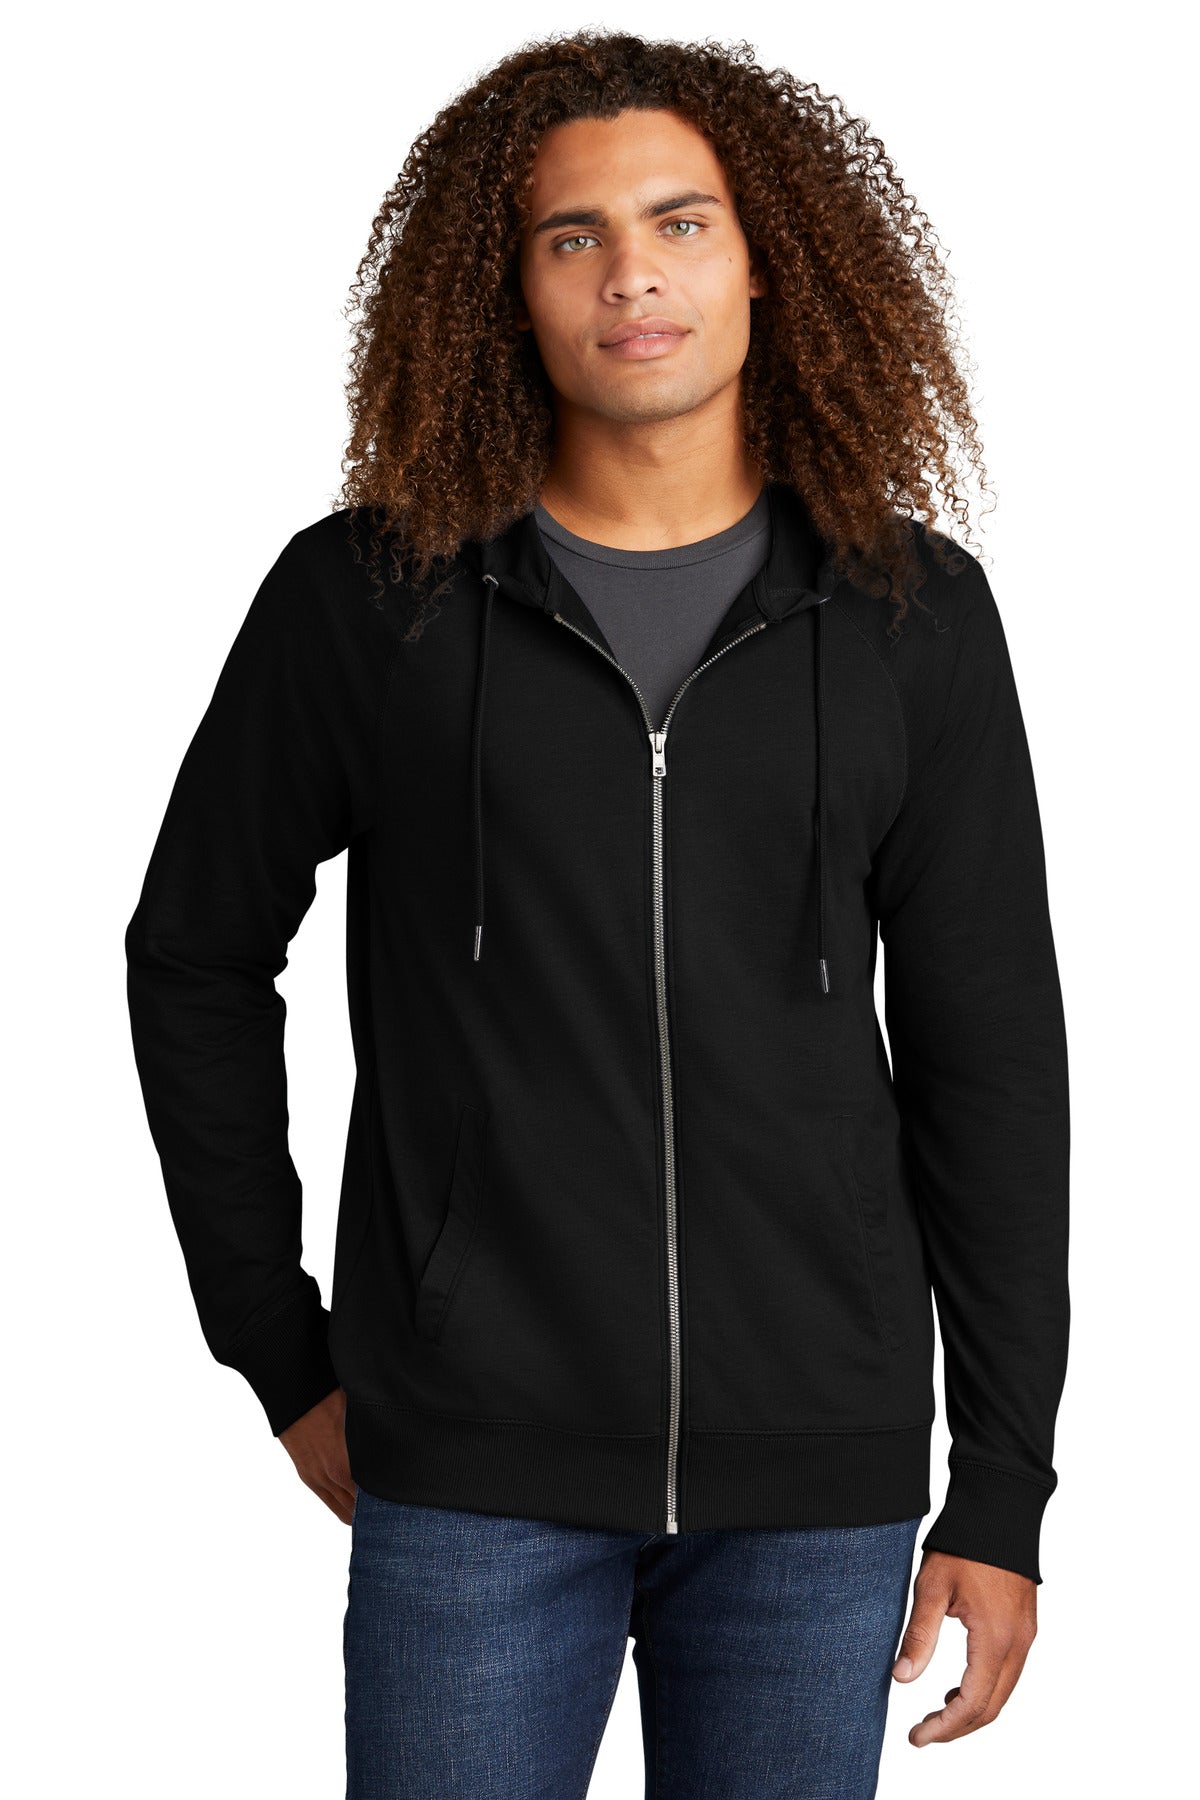 District® Featherweight French Terry™ Full-Zip Hoodie DT573